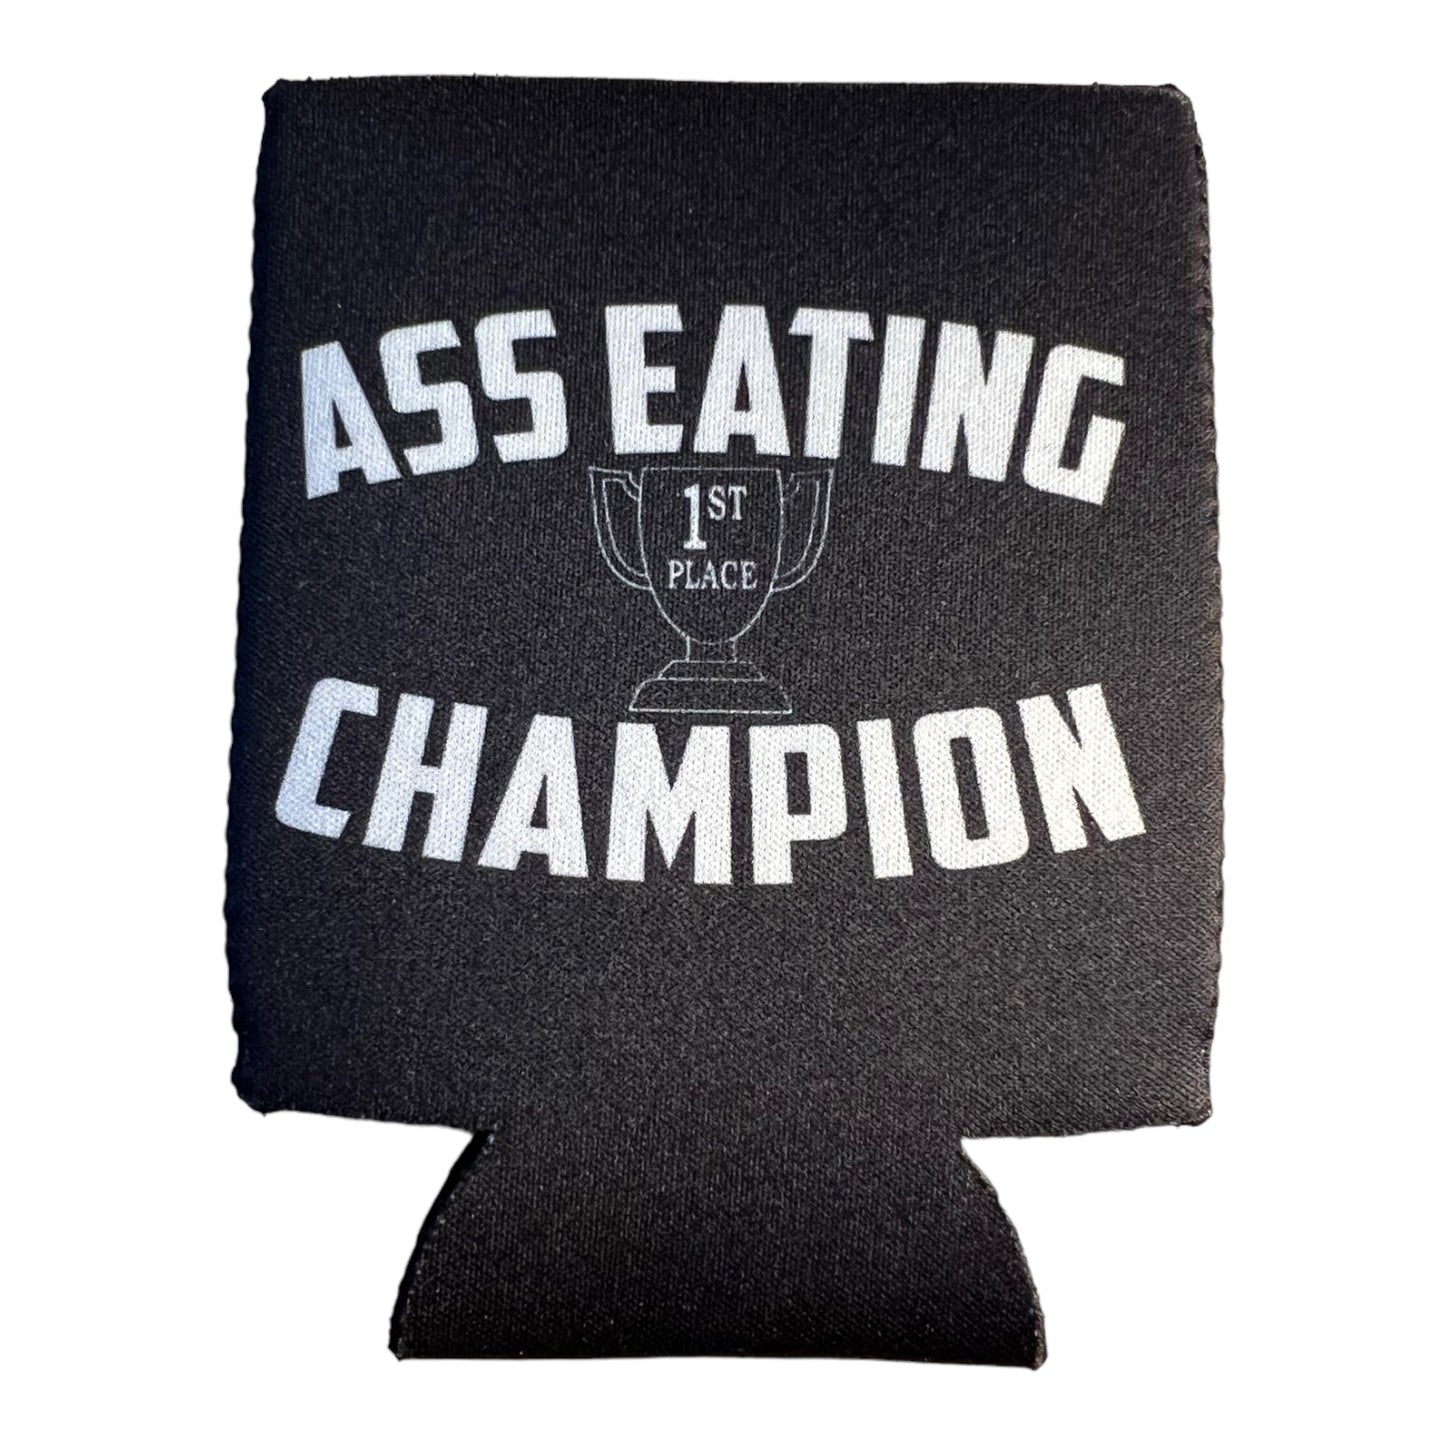 Ass Eating Champion Funny Beer Can Cooler Holder Sleeve